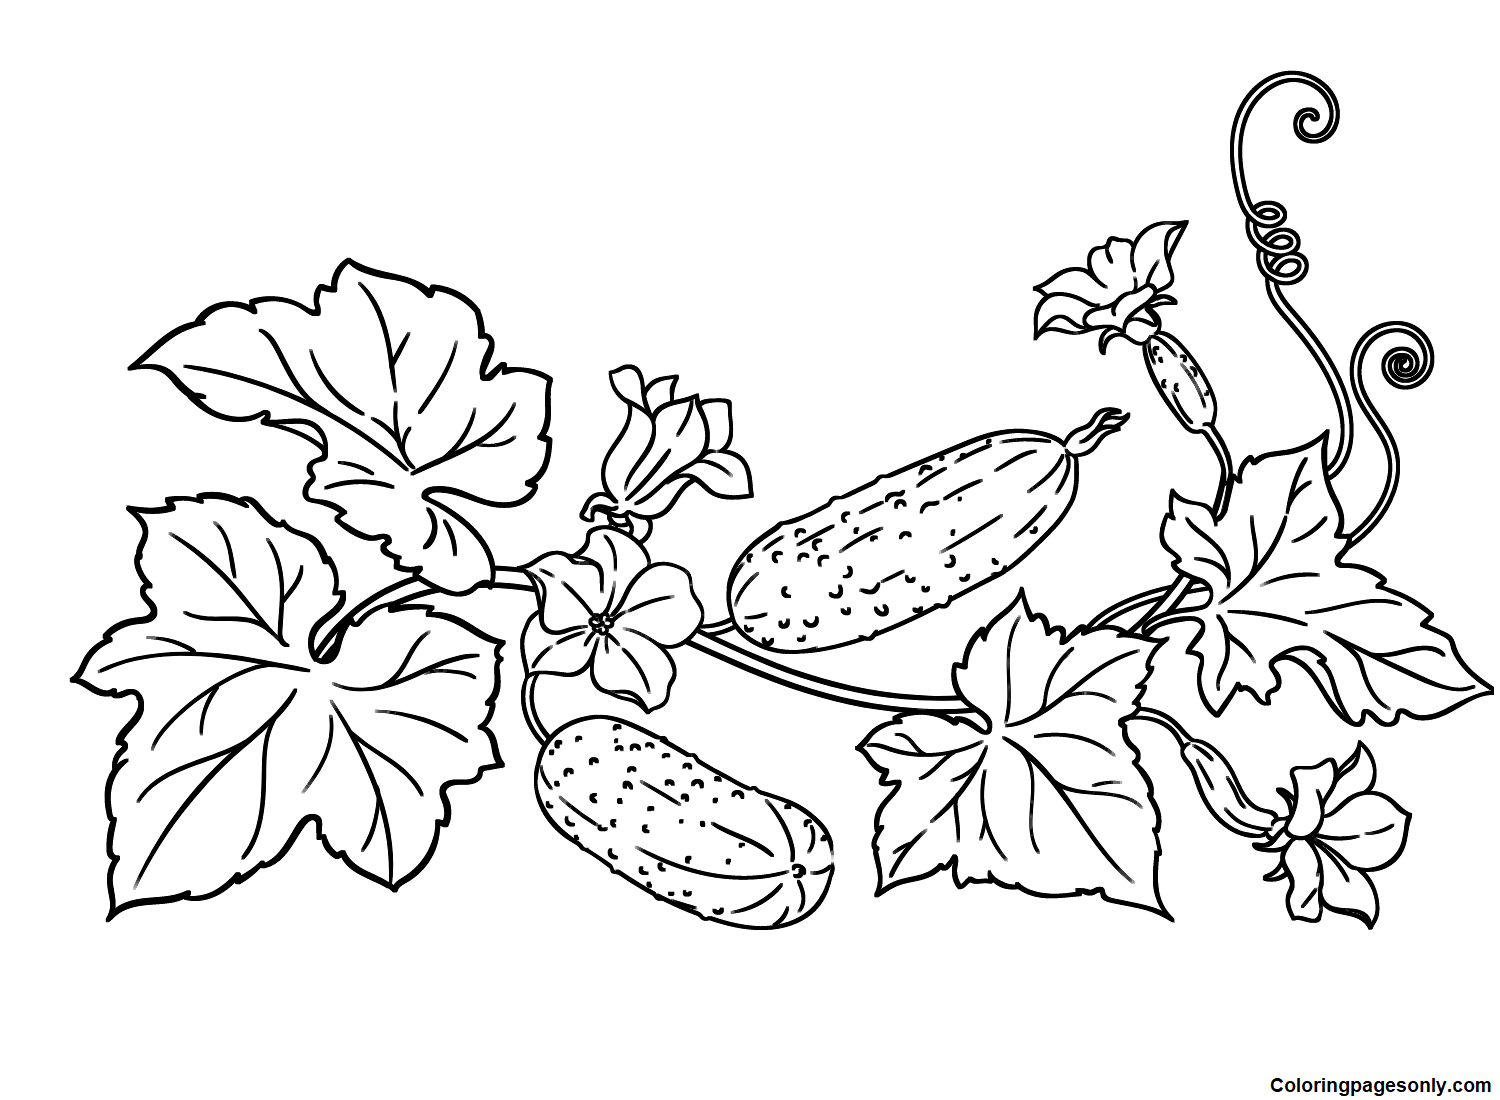 Cucumber Plant Coloring Pages